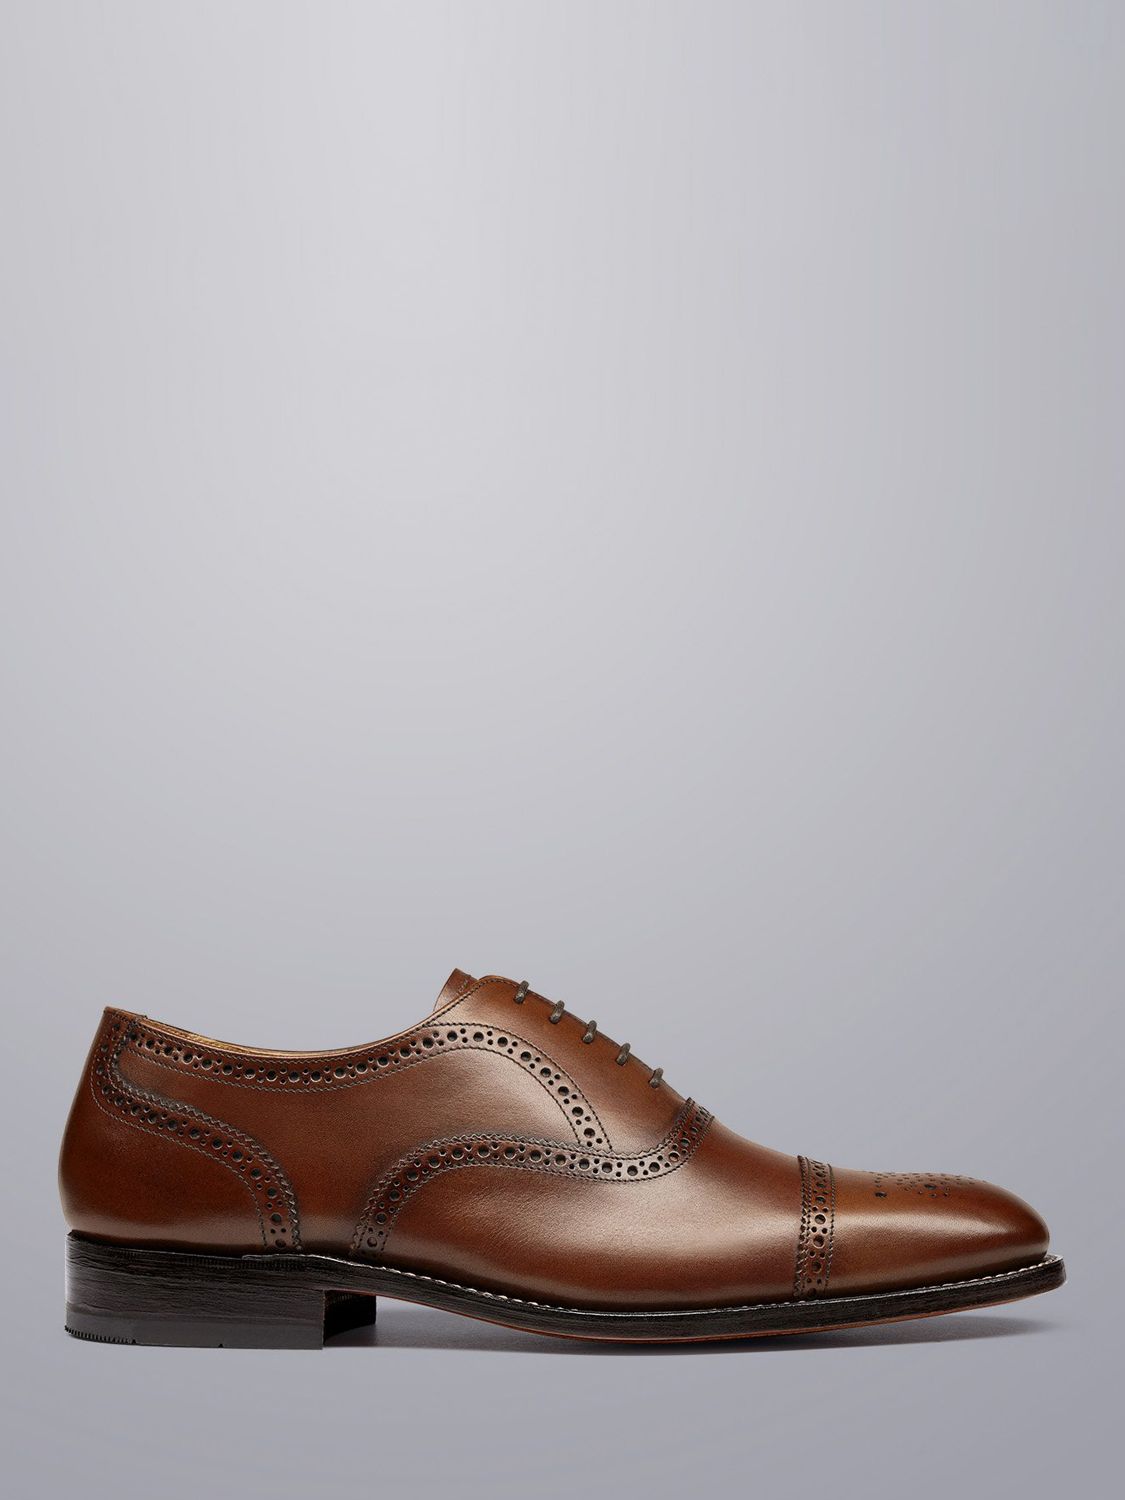 Charles Tyrwhitt Leather Oxford Brogue Shoes, Chestnut Brown, 10